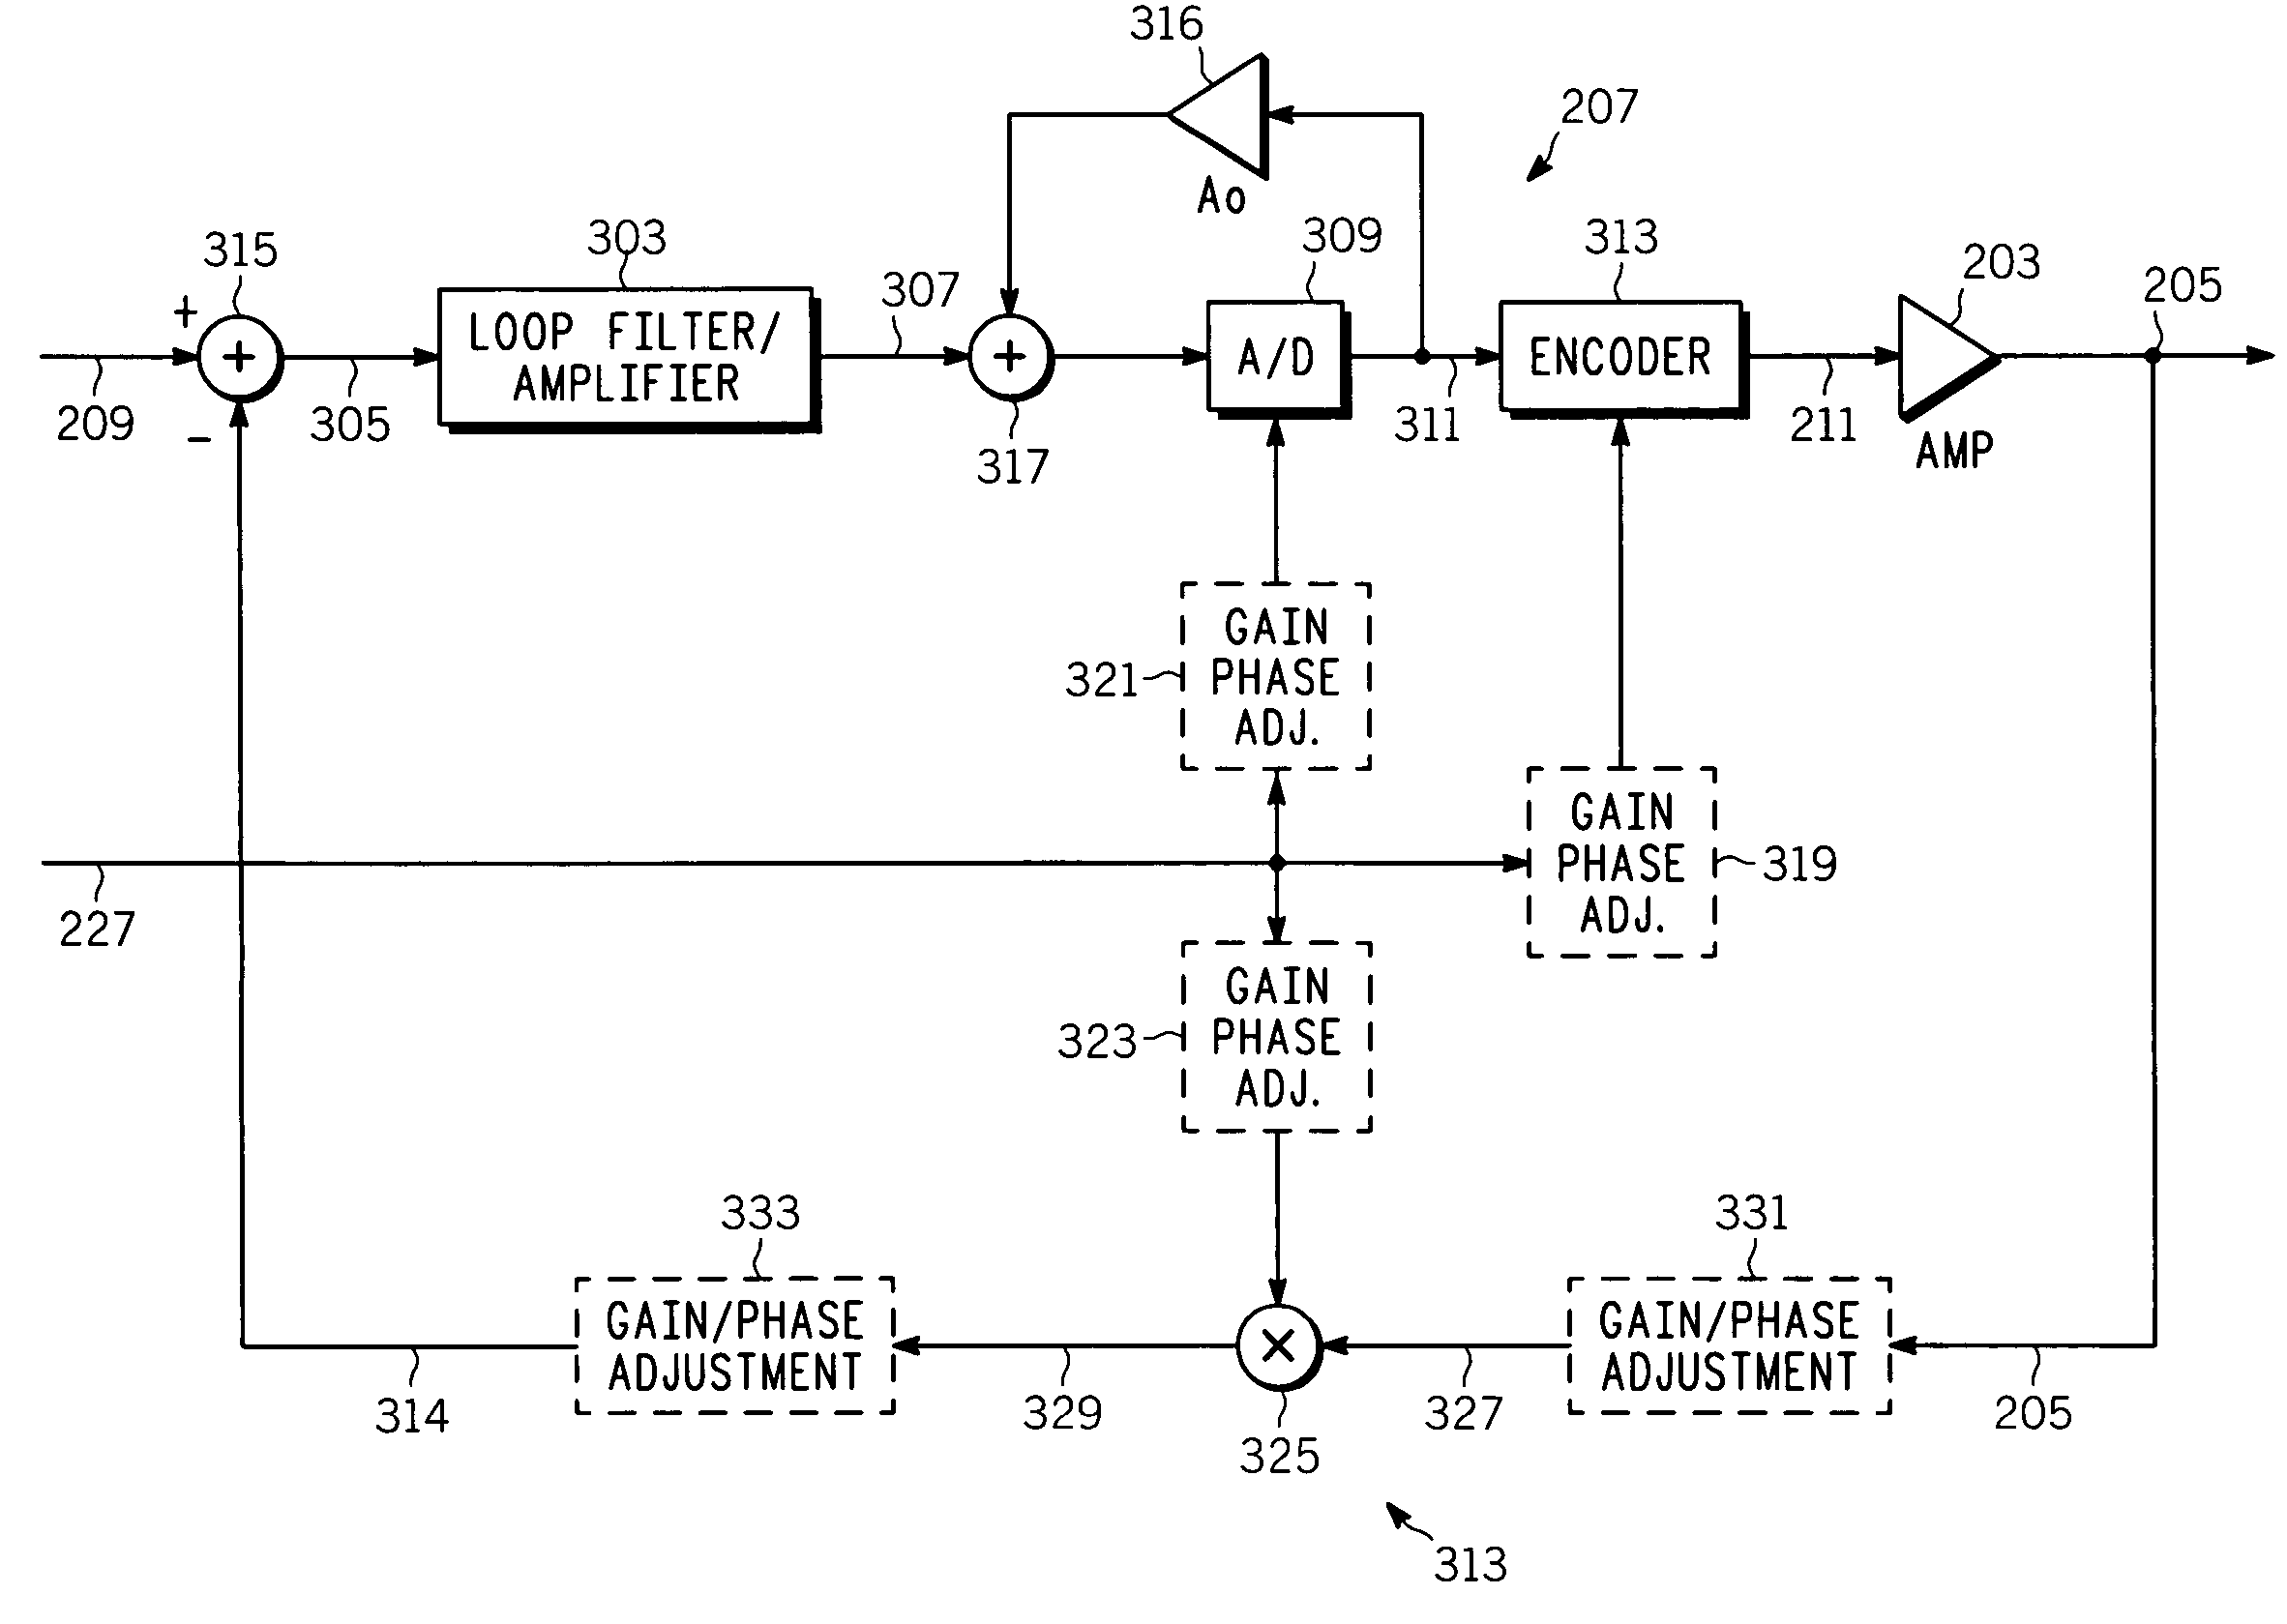 Switching power amplifier using a frequency translating delta sigma modulator